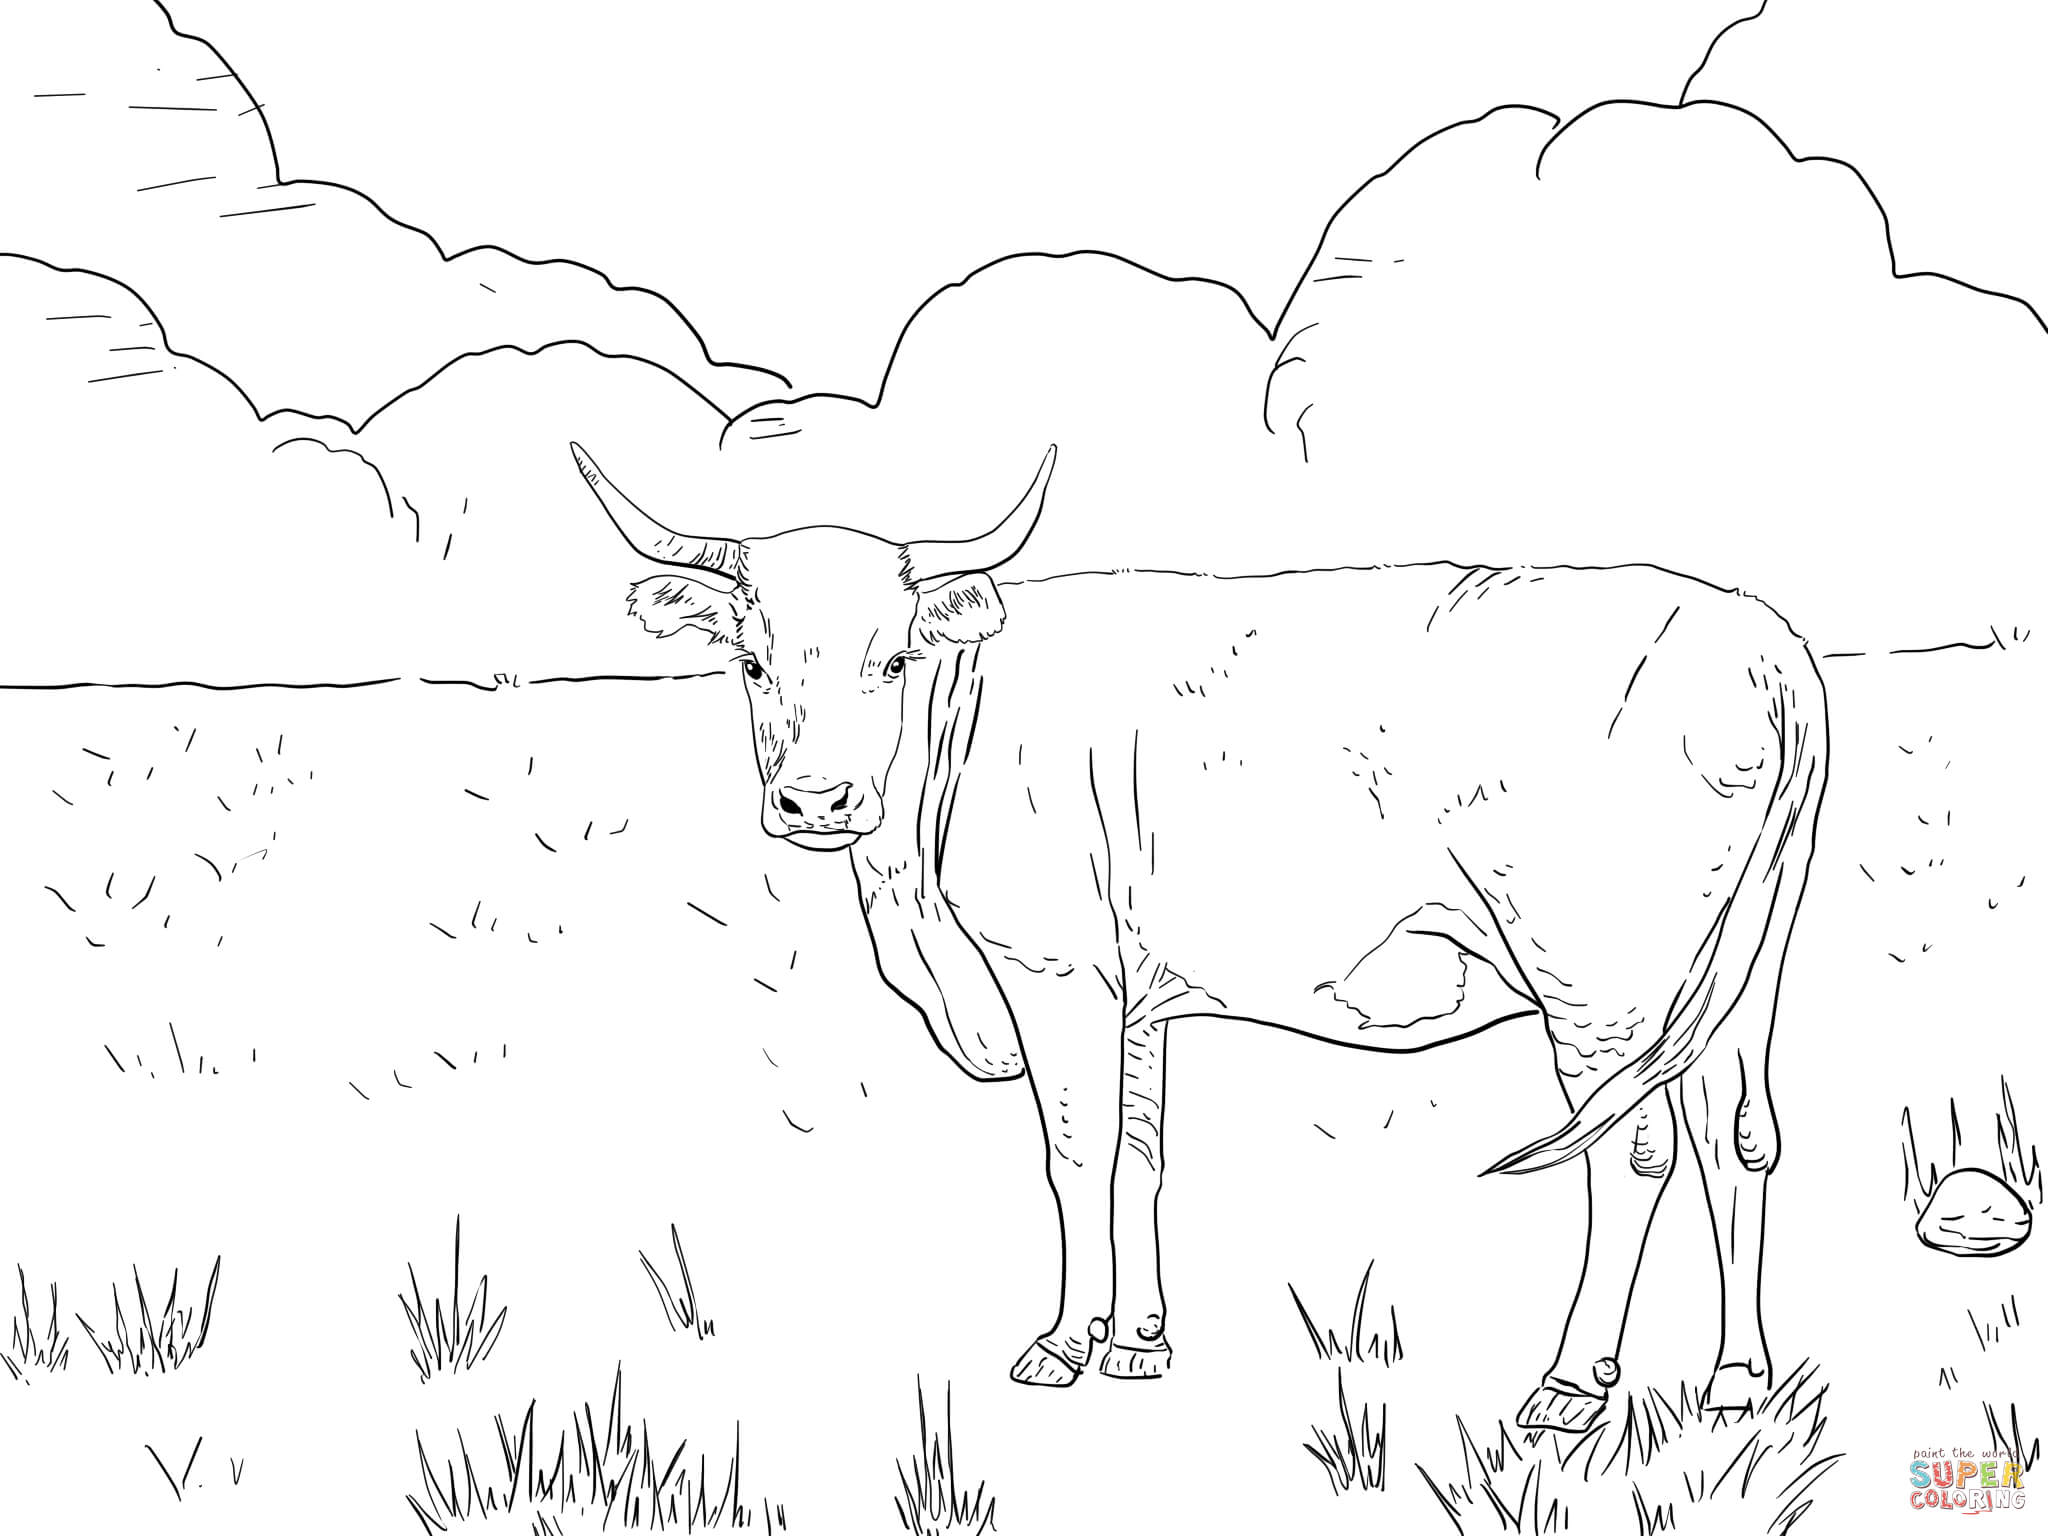 Cattle coloring pages | Free Coloring Pages